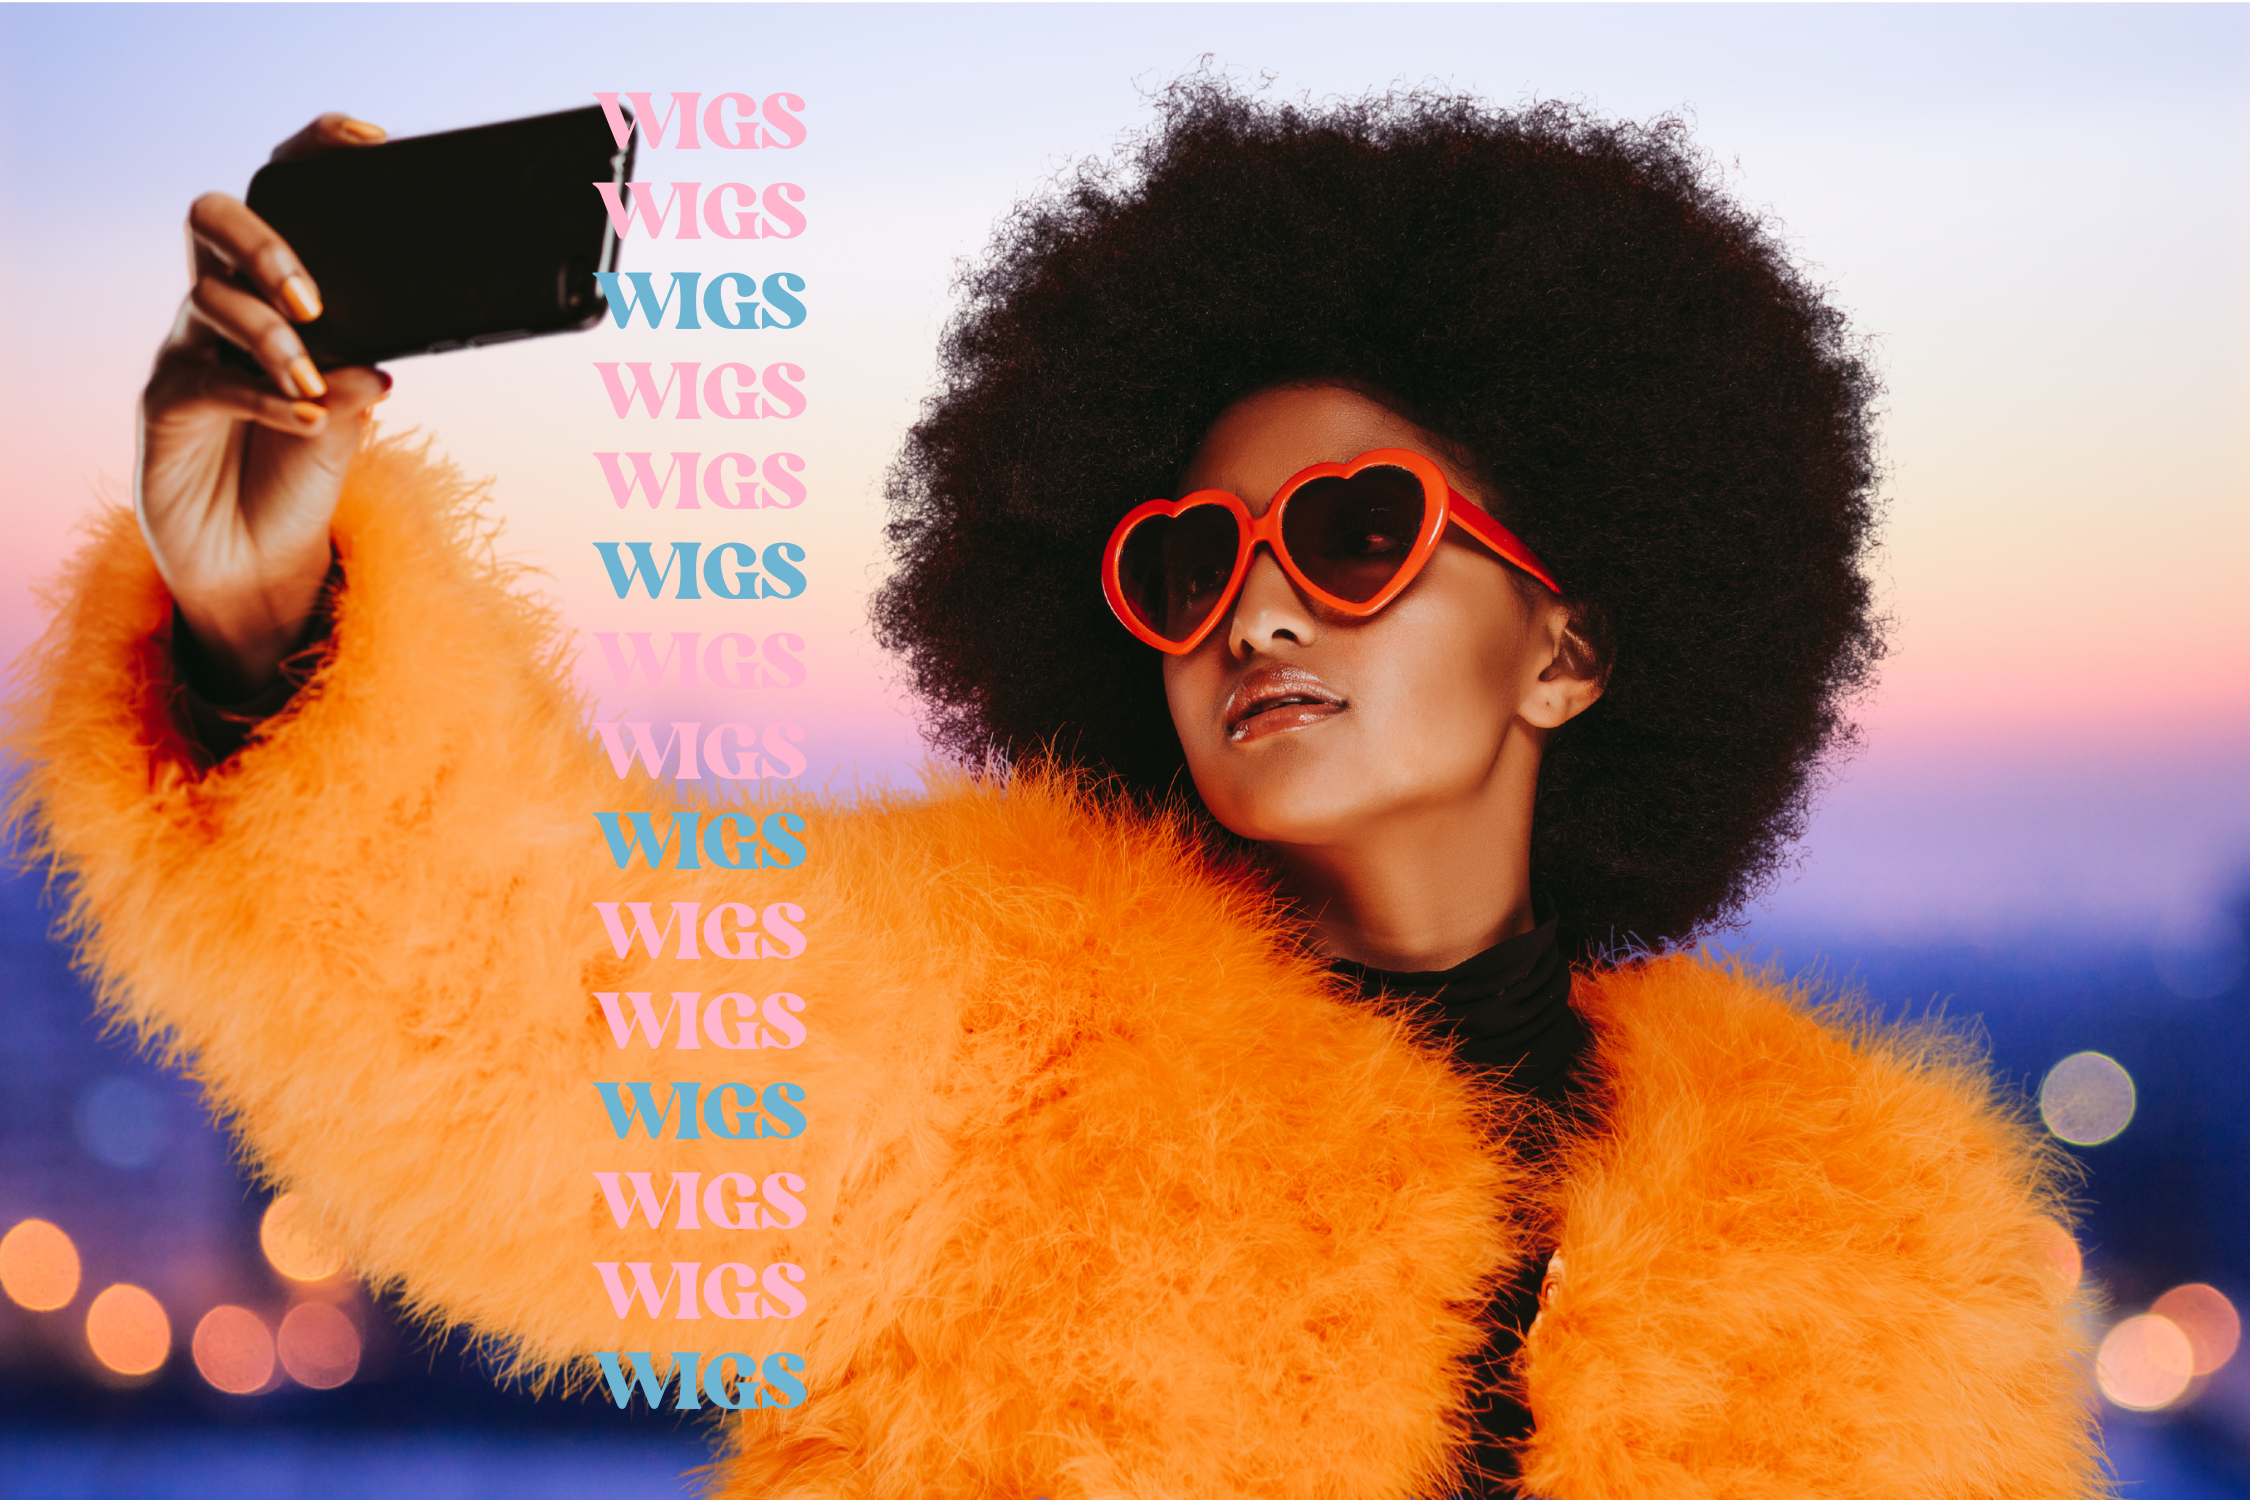 A woman holds a phone in her right hand and looks up at it as if she is taking a selfie. Her hair is done in an afro. She wears a black turtle neck top with a bright orange fluffy jacket on top. On her face is a pair of orange heart shaped sunglasses. On the left is a text that reads "Wigs, Wigs, Wigs, Wigs " all the way down to the bottom of the image.  